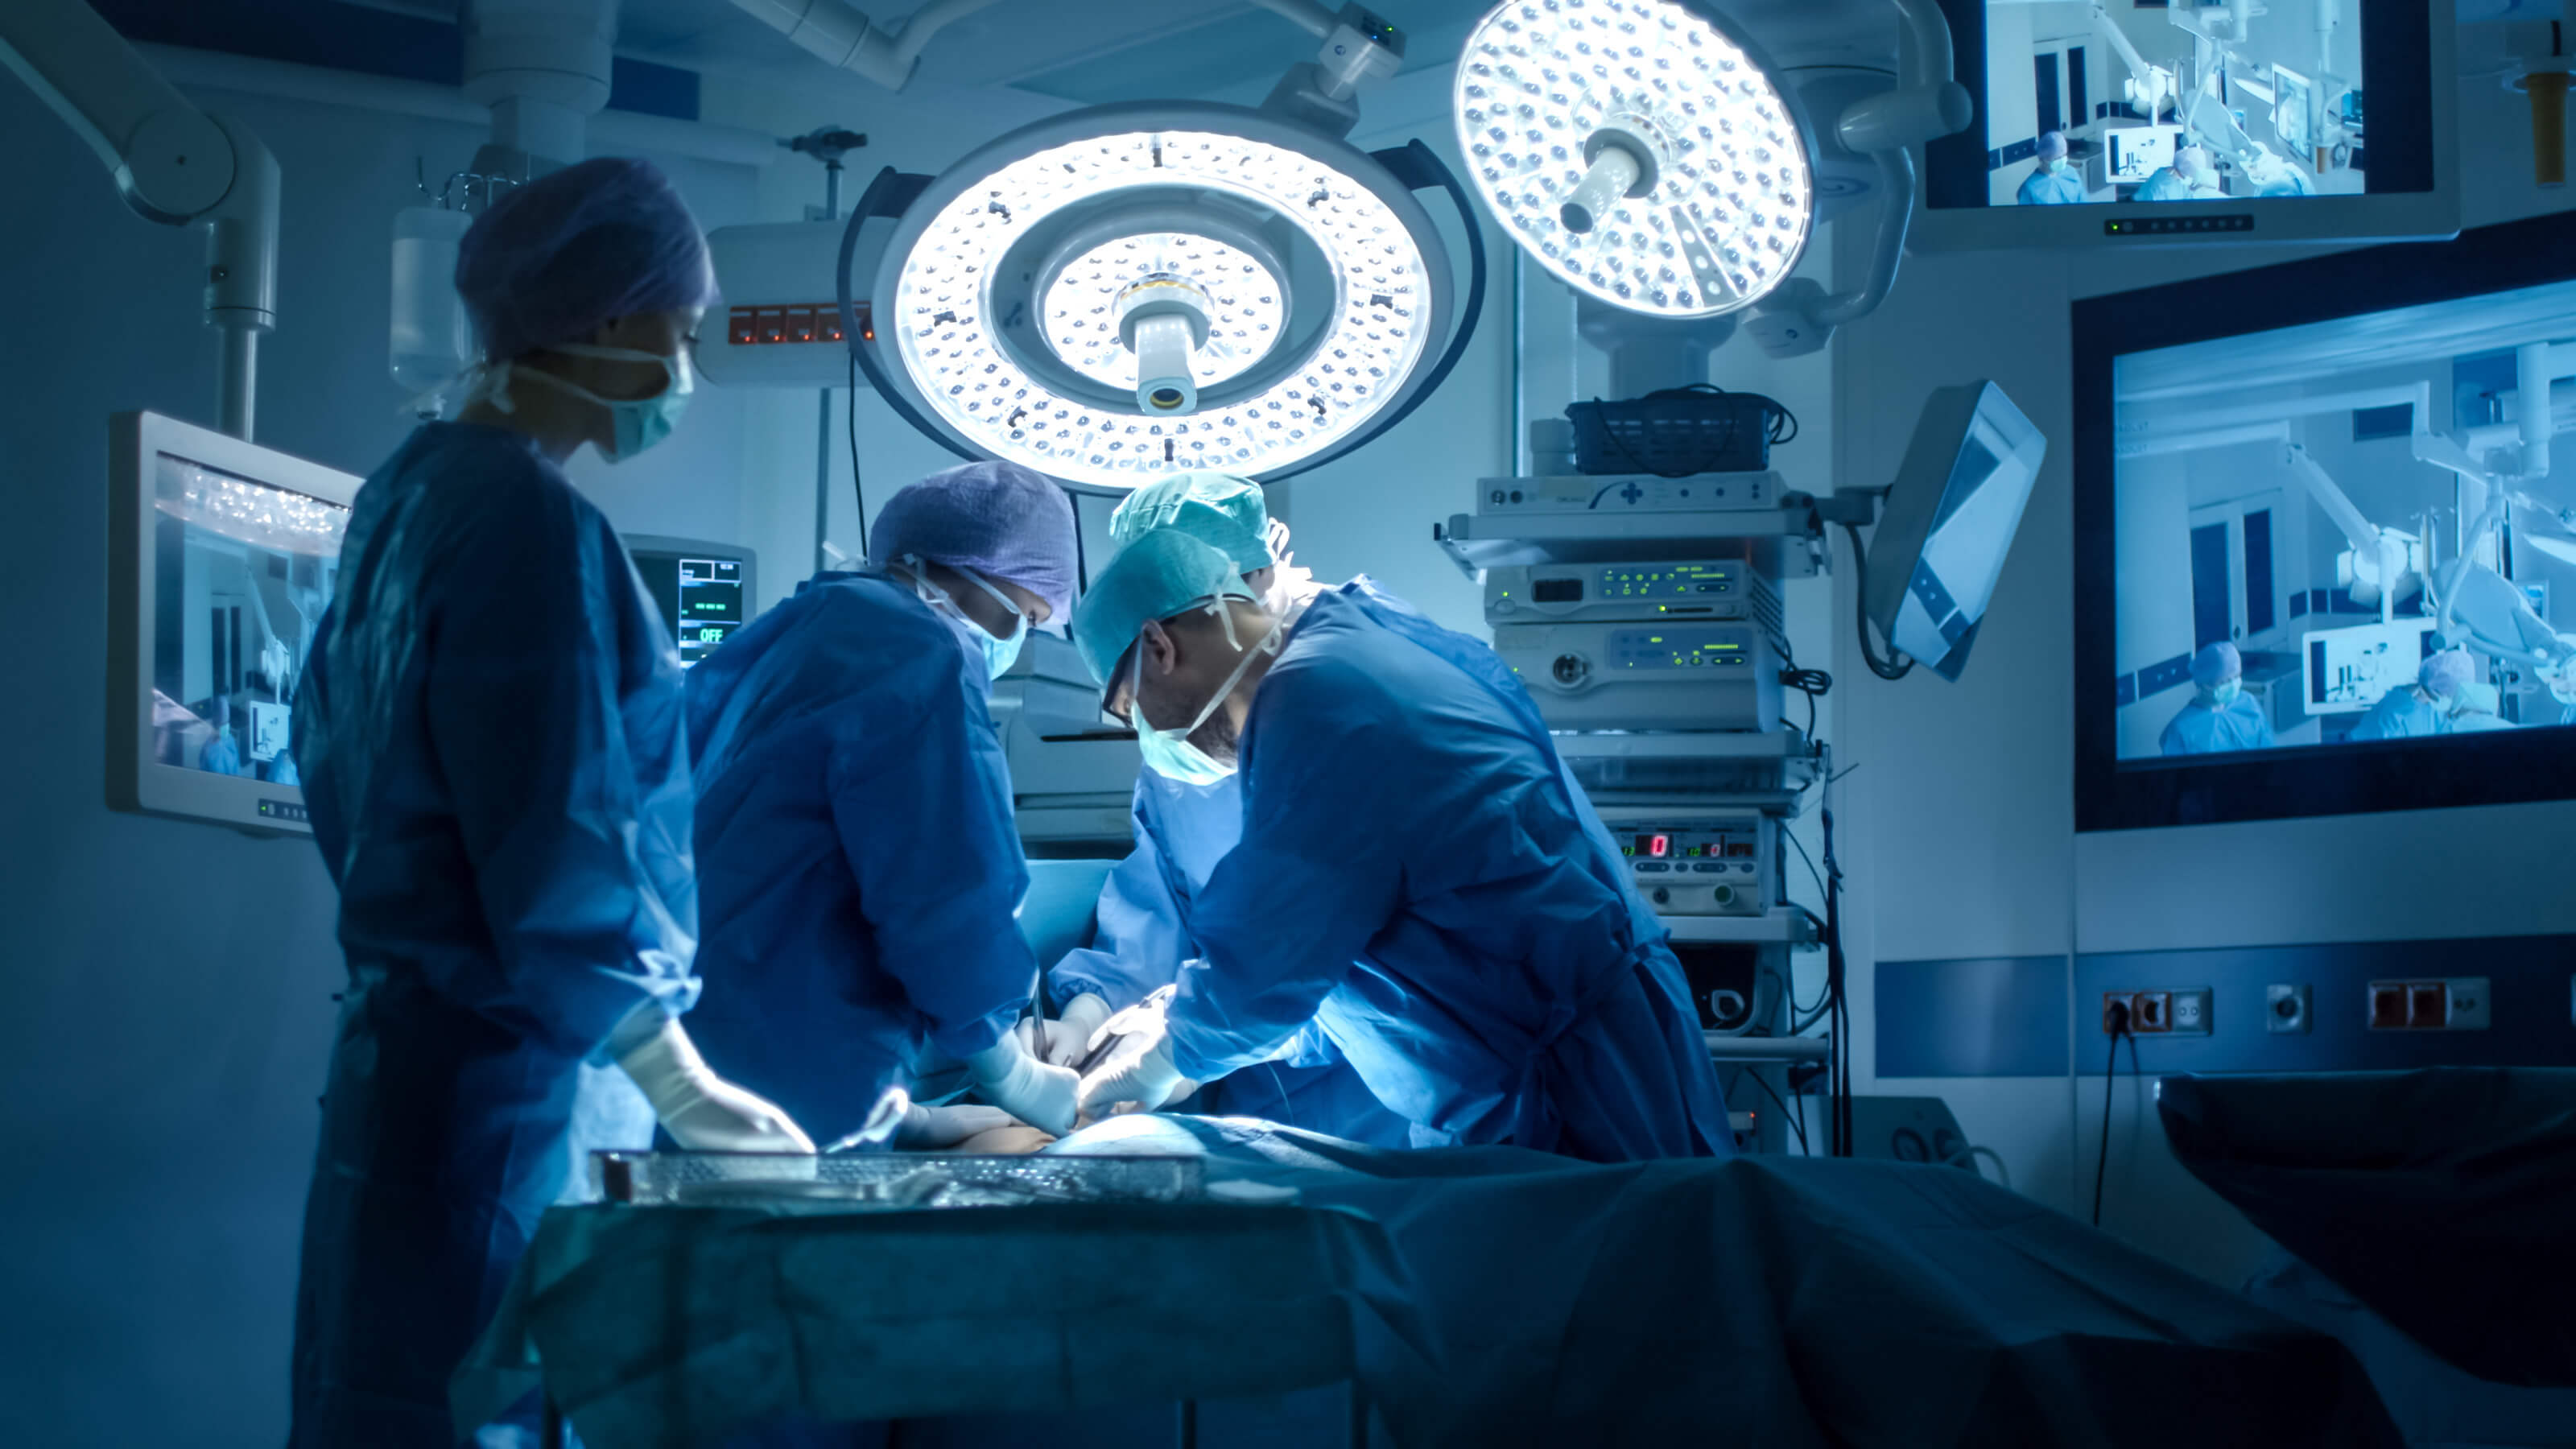 Should I Select A Surgical Residency?